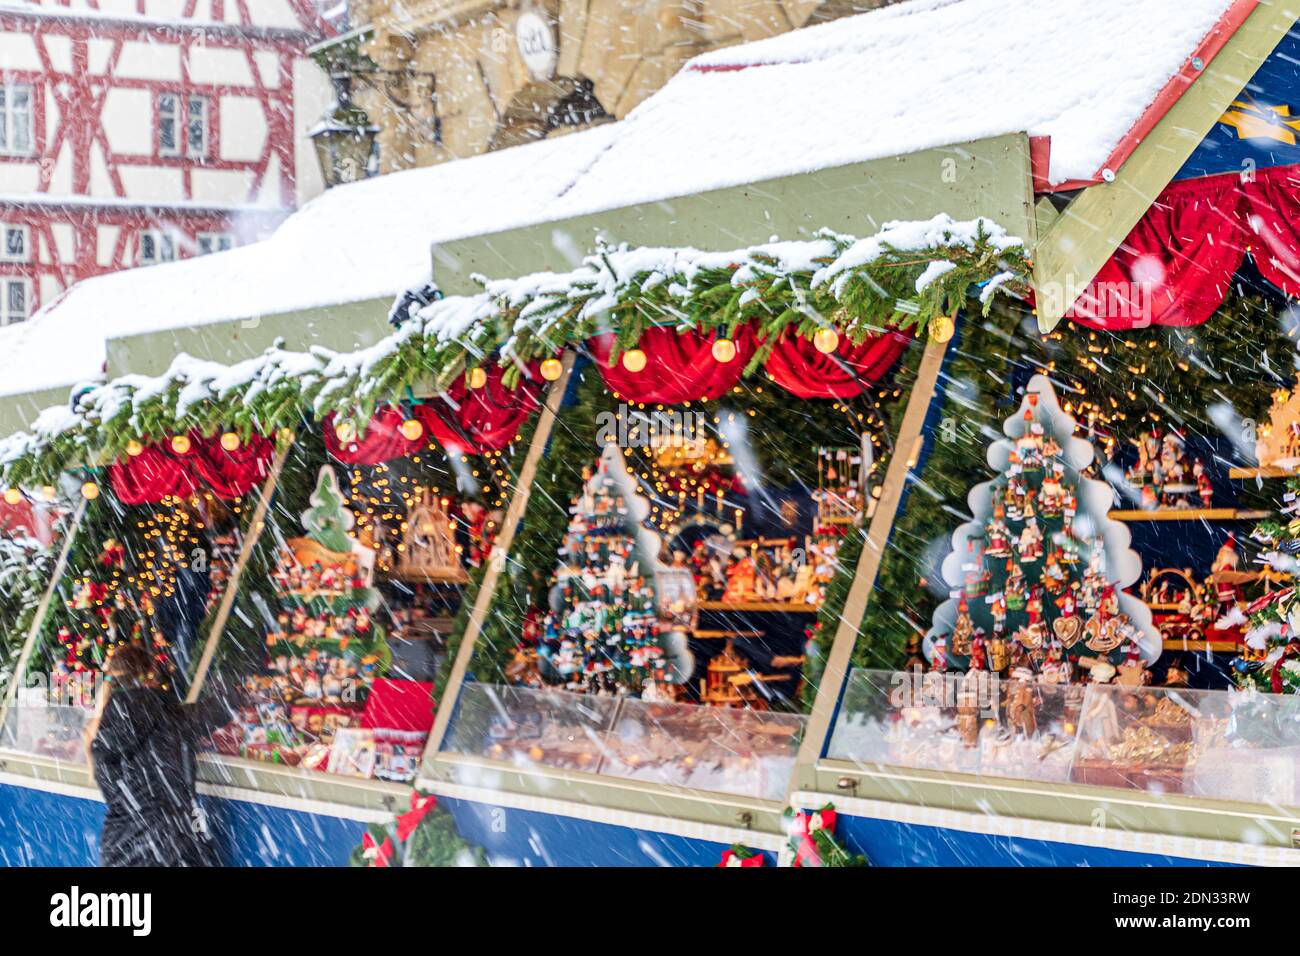 Snowy Christmas Market stalls at Town Hall in medieval town of Rothenburg ob der Tauber, Bavaria, Germany Stock Photo